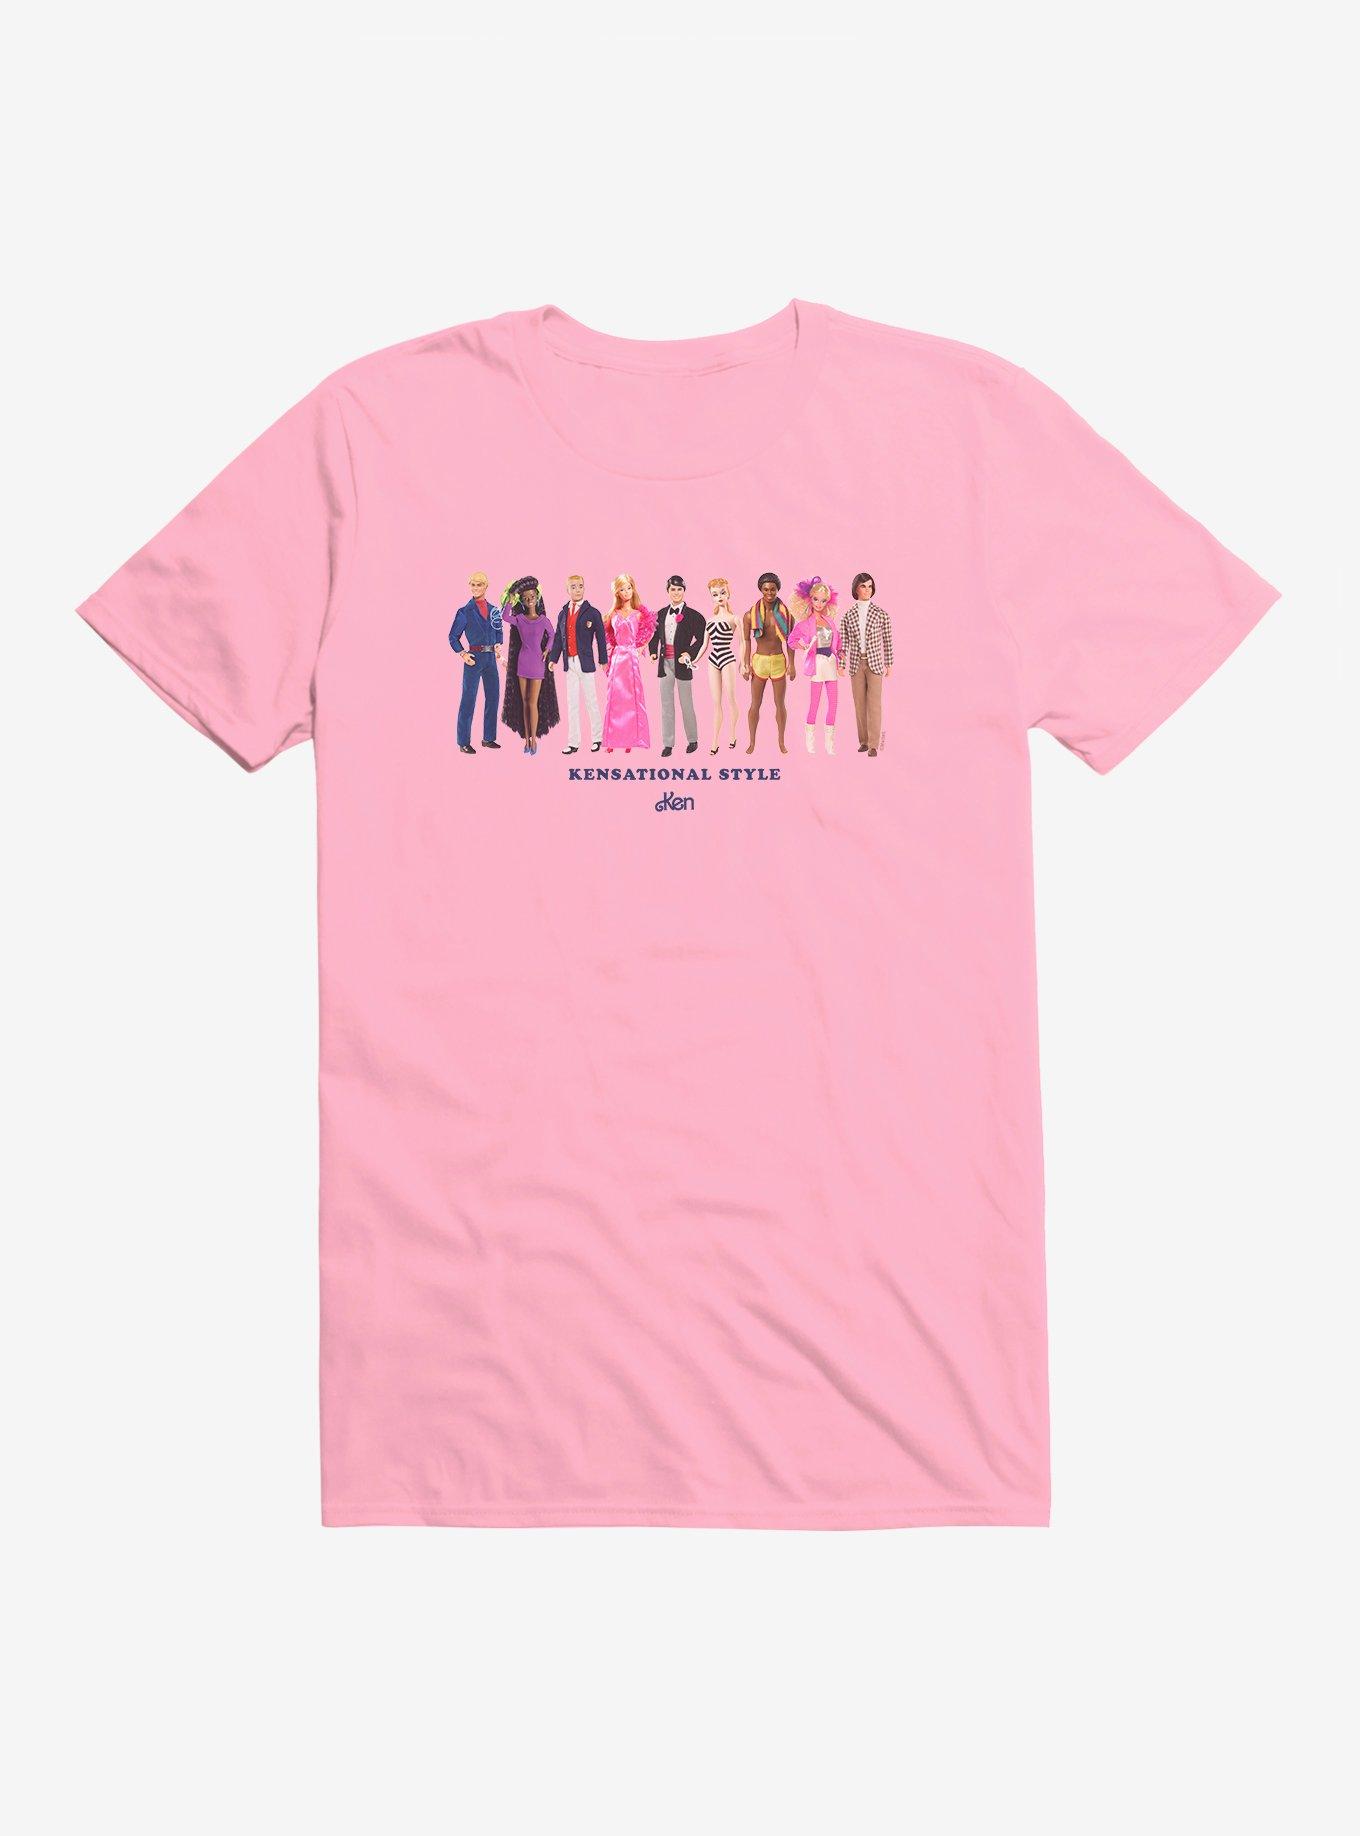 Barbie Kensational Style T-Shirt, CHARITY PINK, hi-res